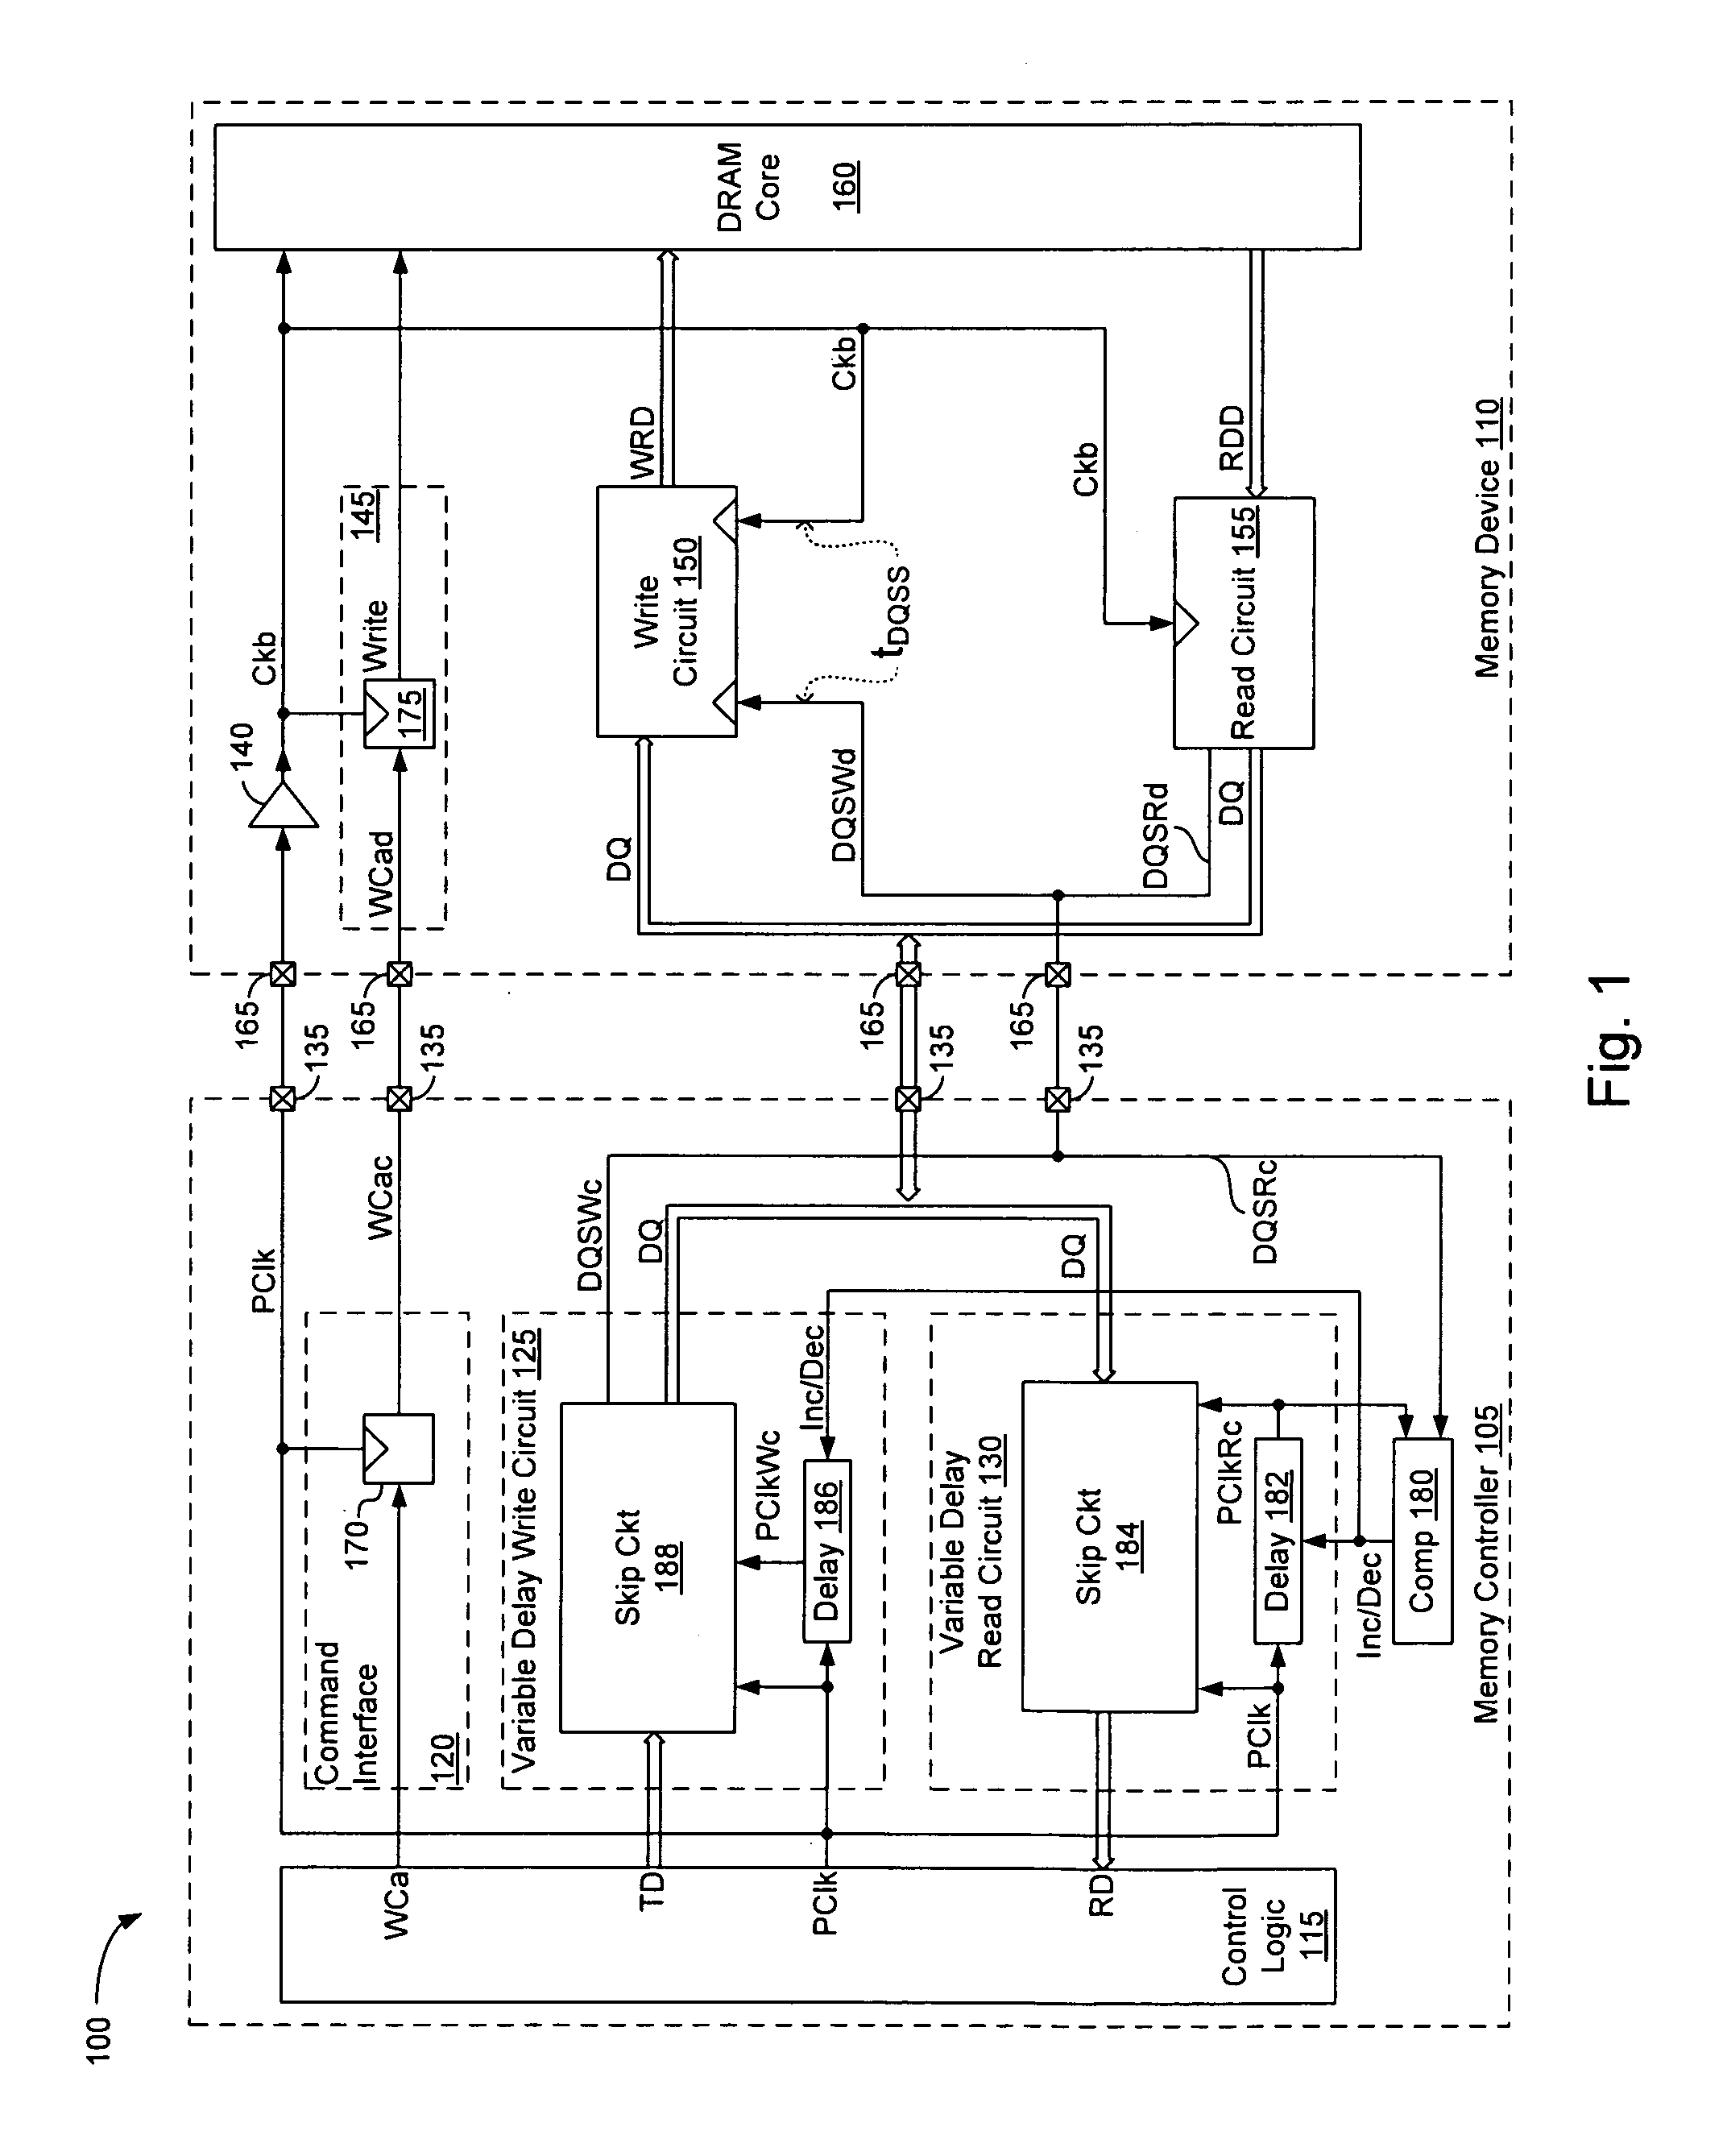 Memory systems and methods for dynamically phase adjusting a write strobe and data to account for receive-clock drift